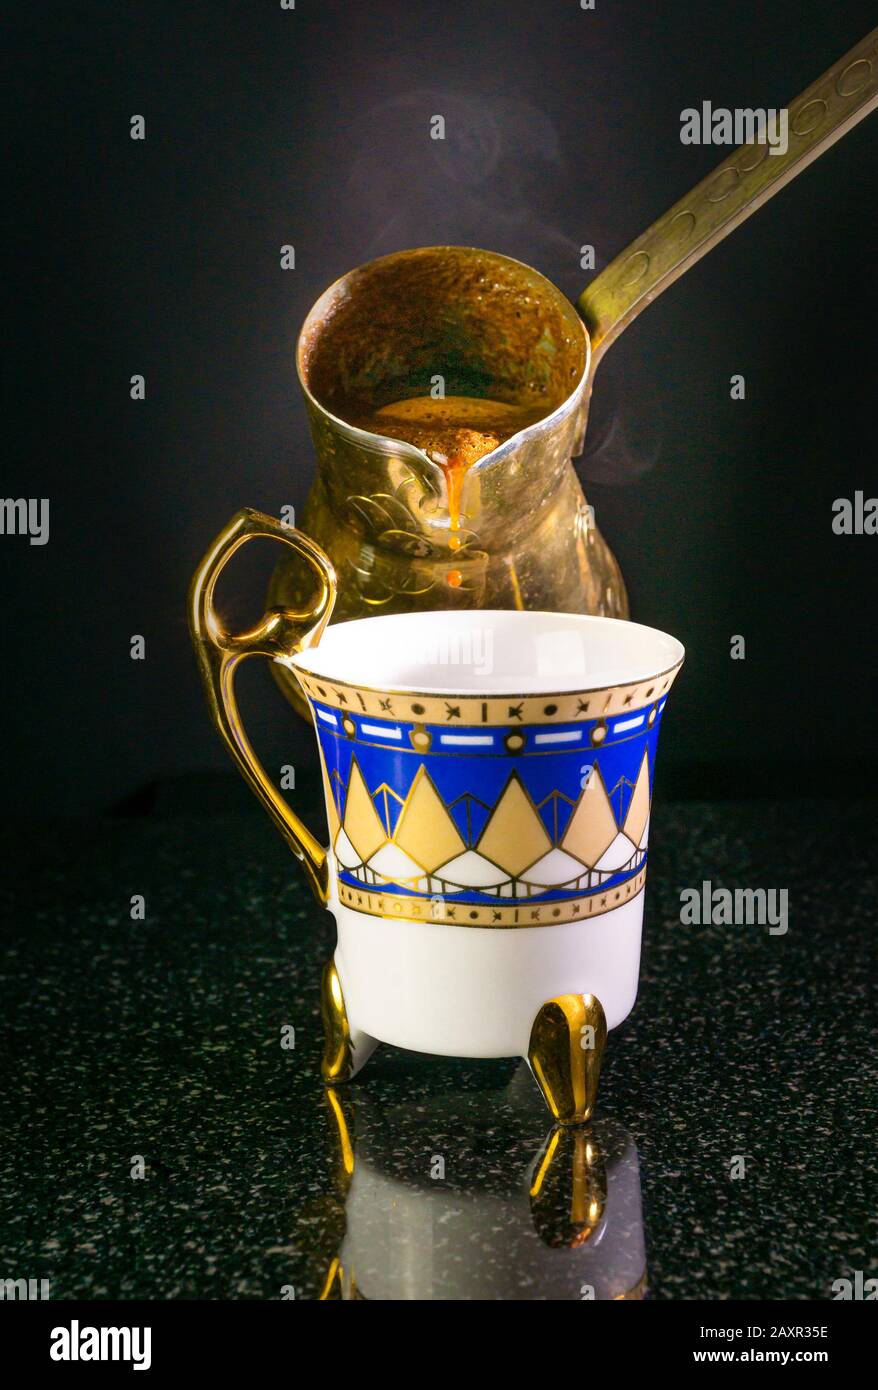 Pouring a cup of traditional Greek cup of coffee. Stock Photo